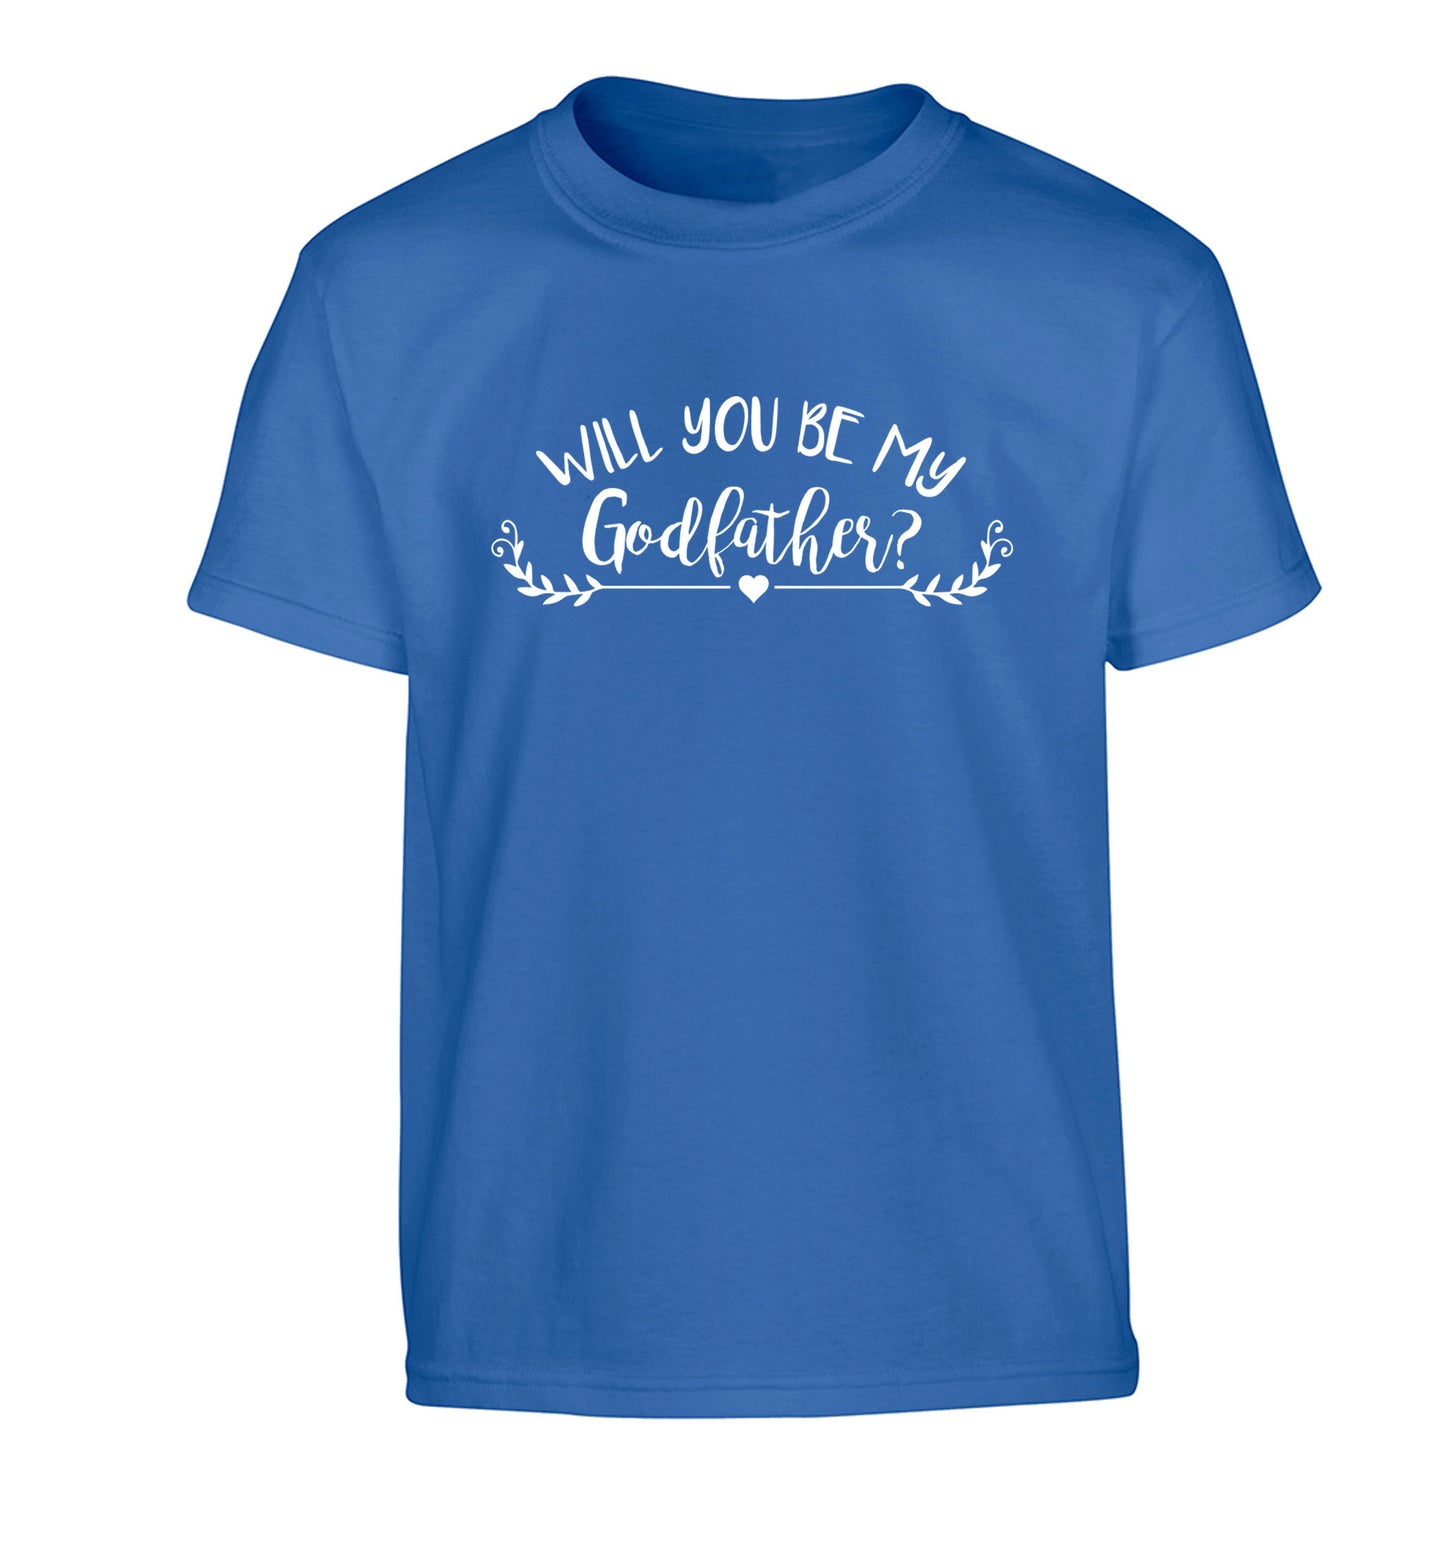 Will you be my godfather? Children's blue Tshirt 12-14 Years